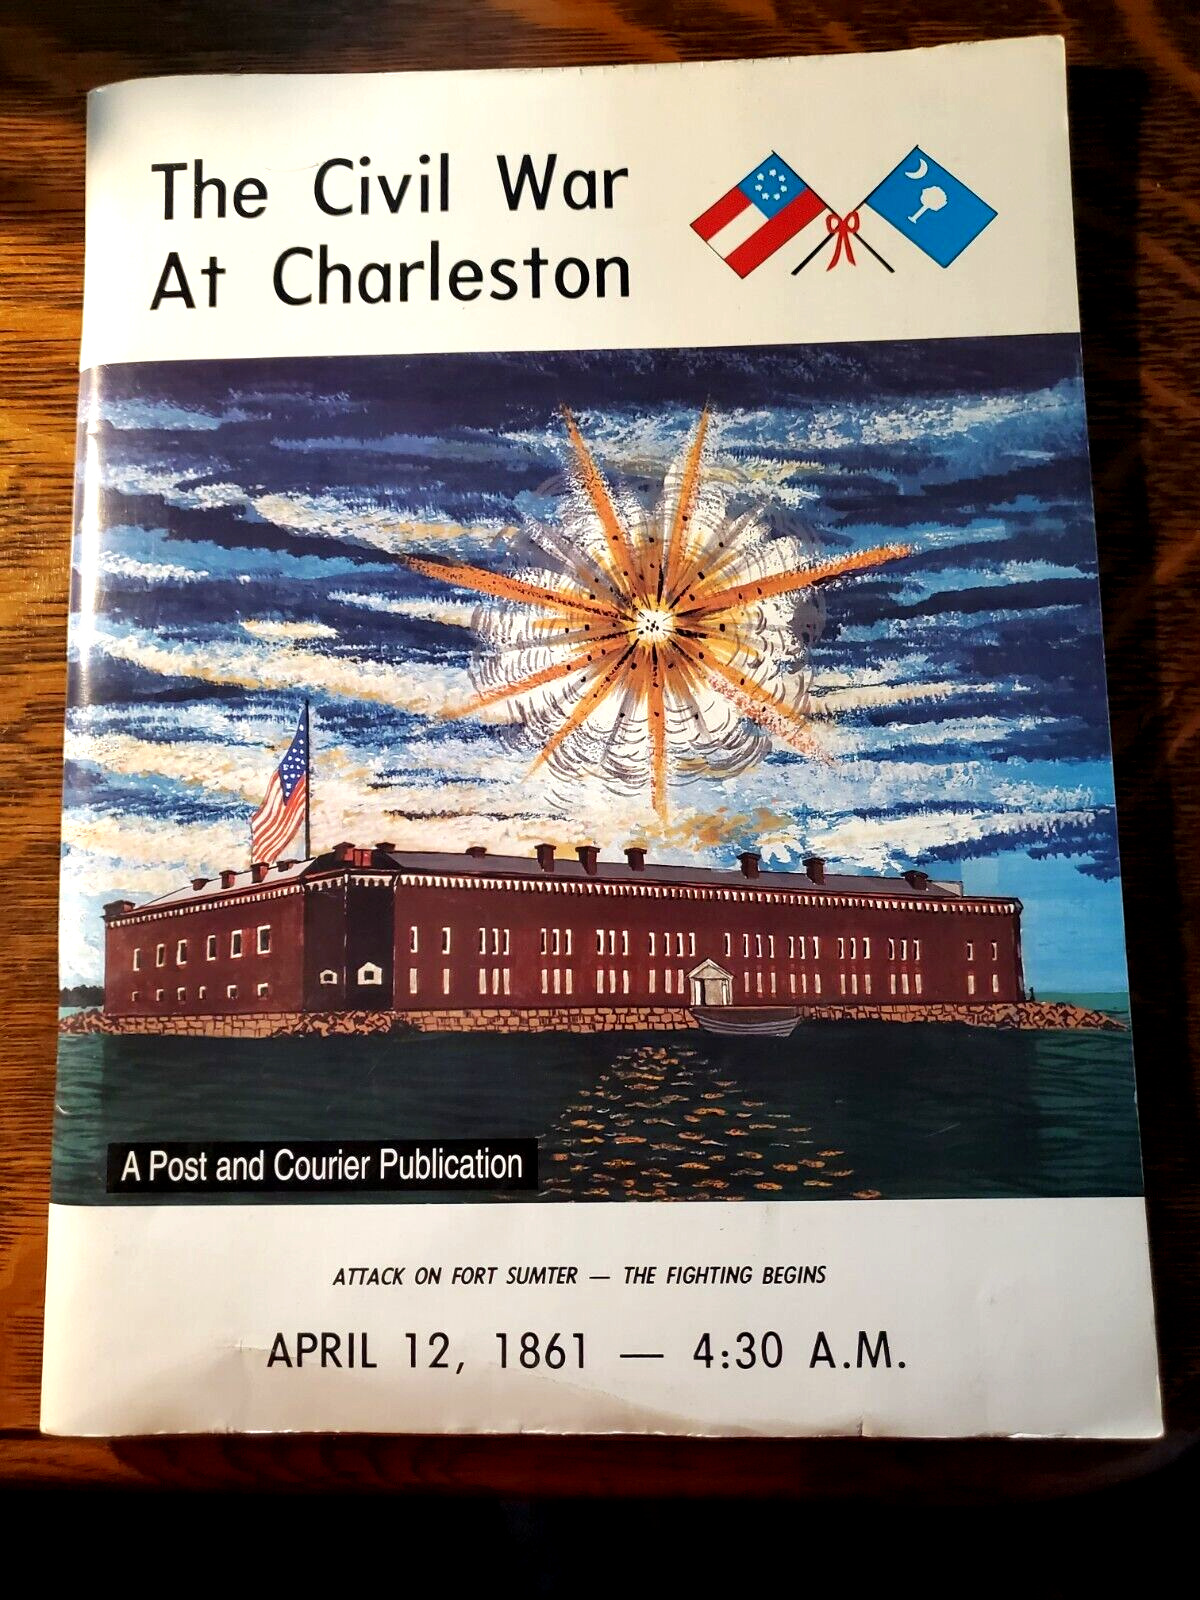 THE CIVIL WAR AT CHARLESTON A POST AND COURIER PUBLICATION 1998